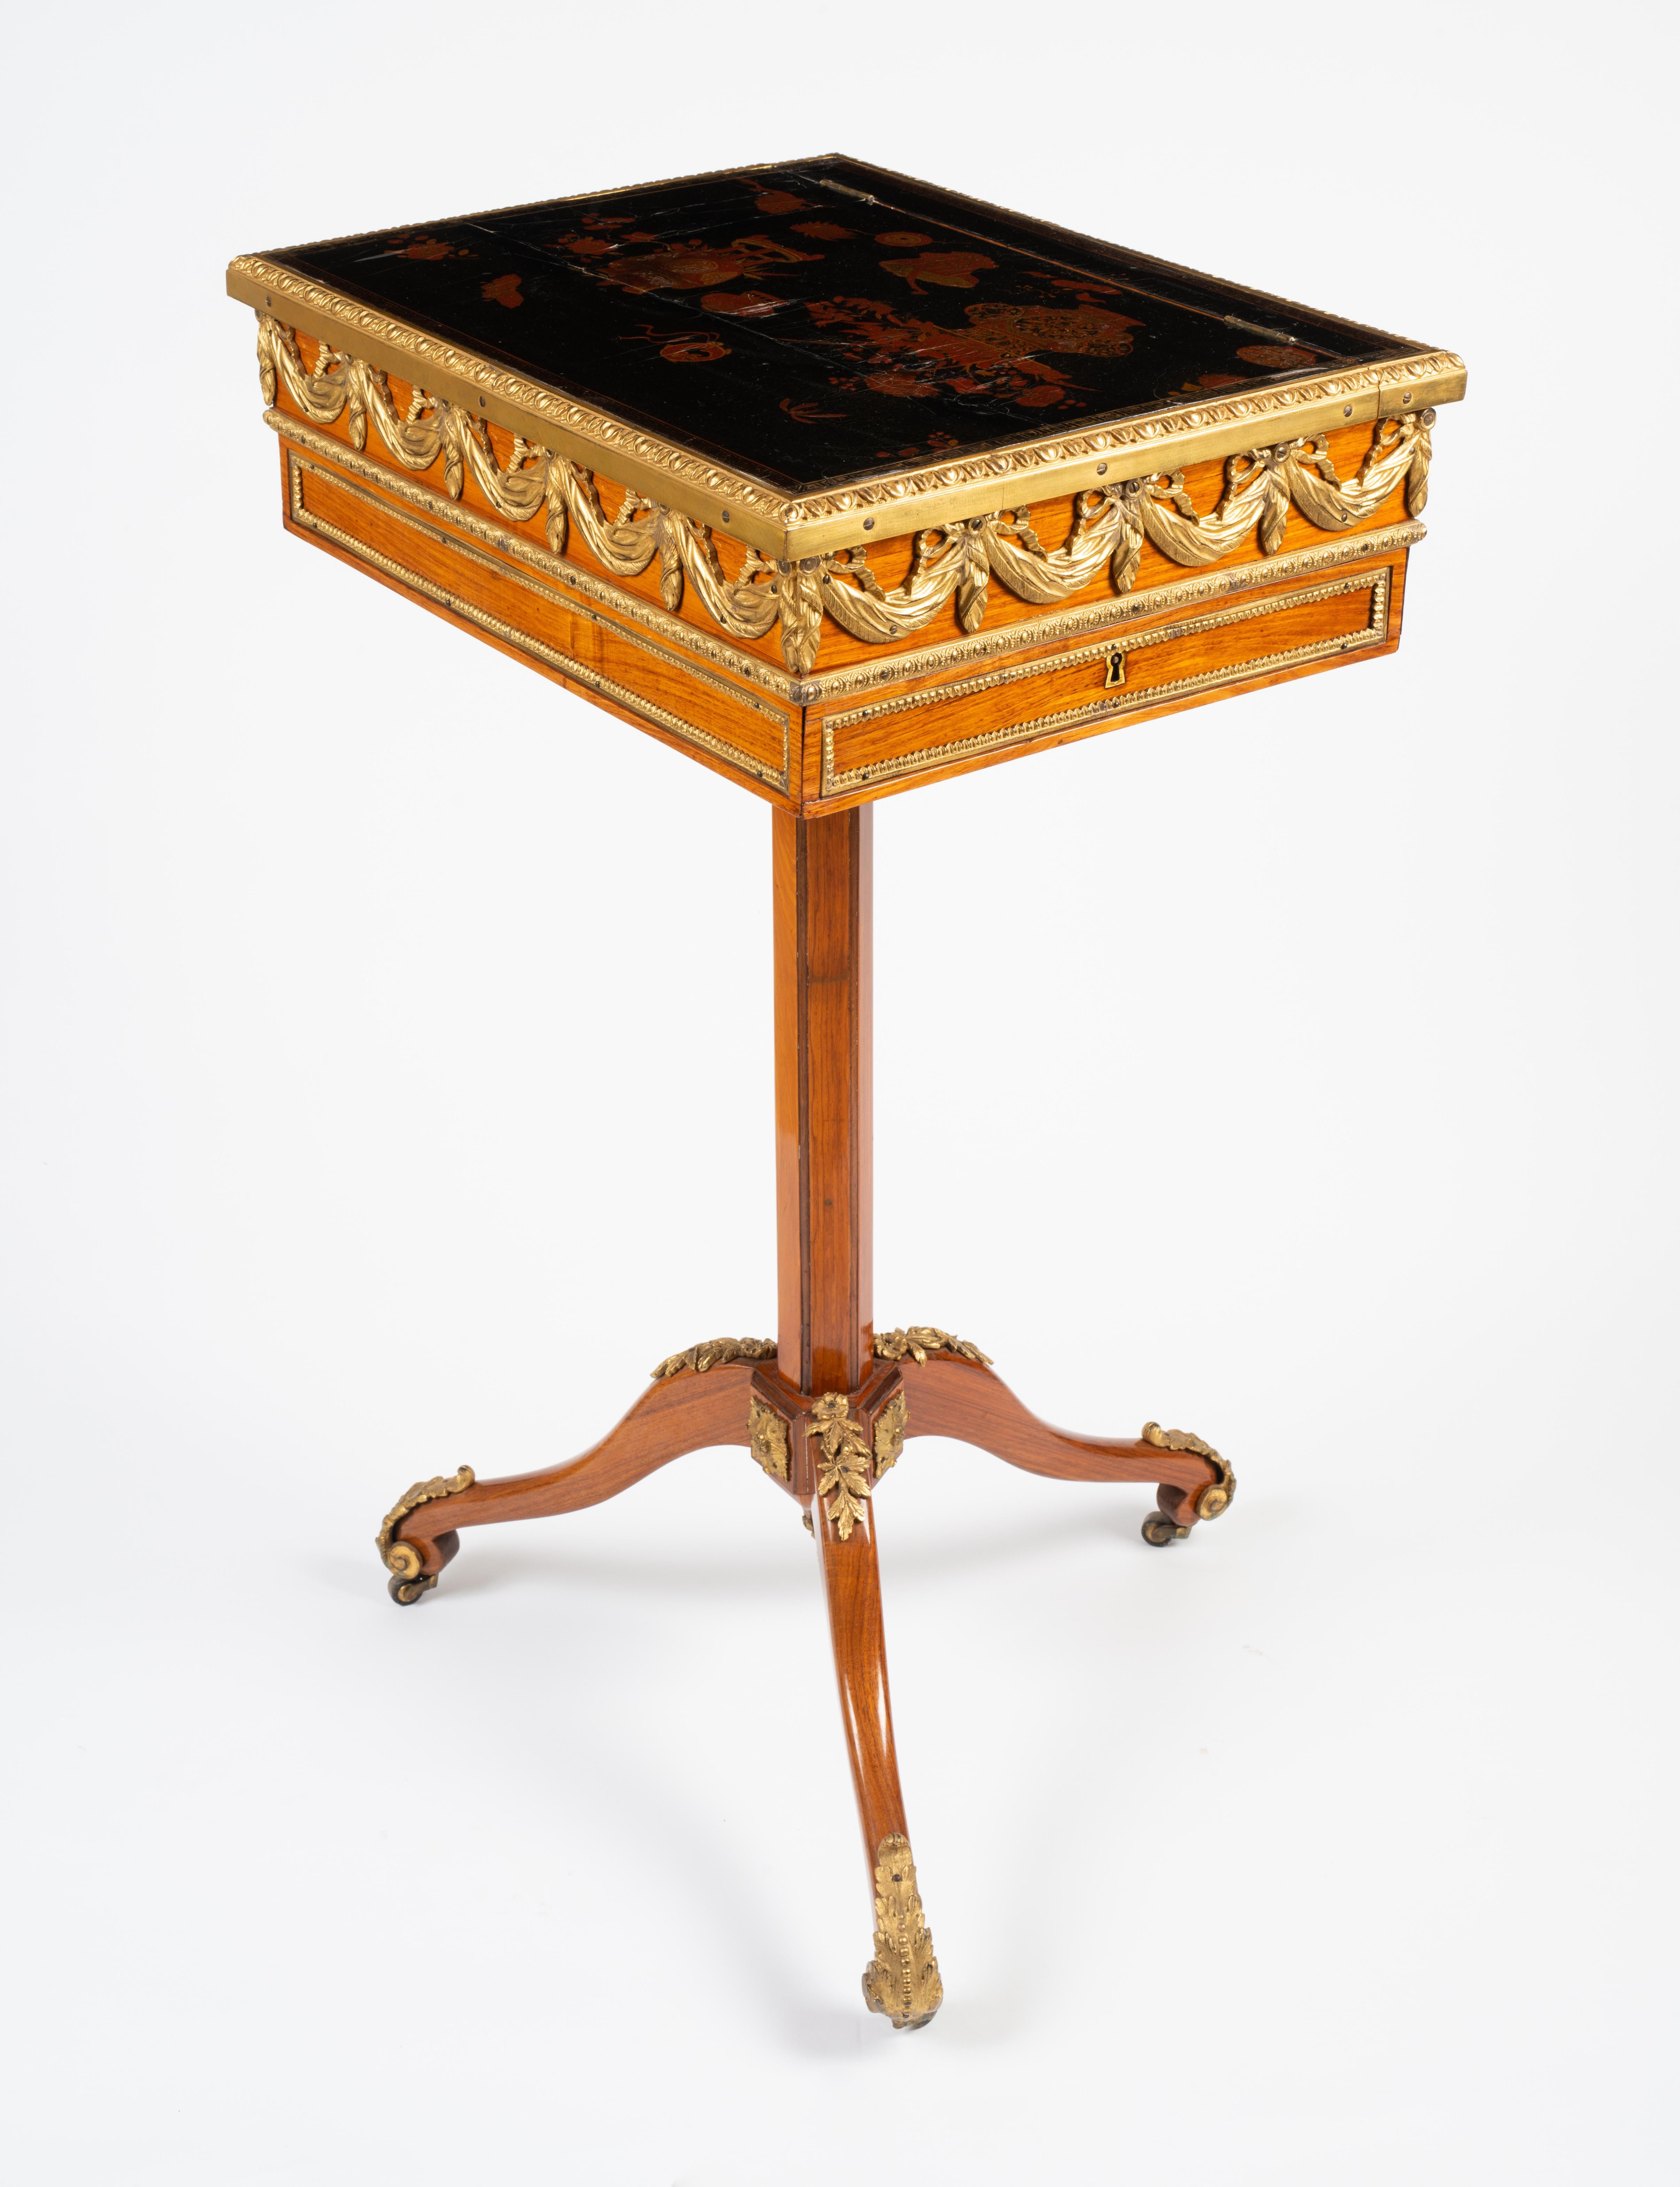 18th Century Louis XVI Style Gilt Bronze Tulipwood and Lacquer Mechanical Table For Sale